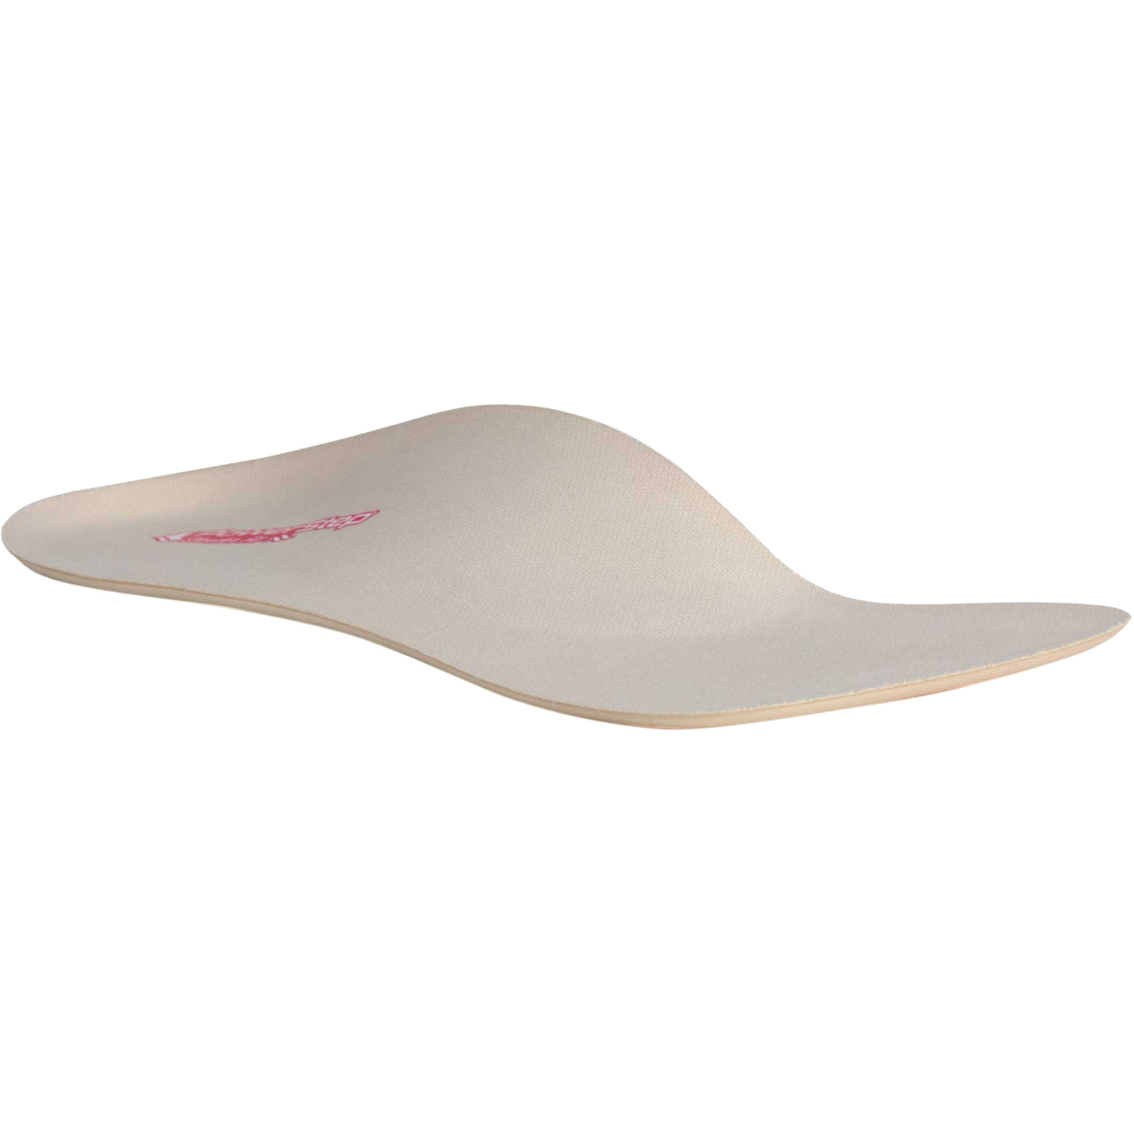 PowerStep Women's SlenderFit Fashion 3/4 Length Insoles - Image 9 of 10